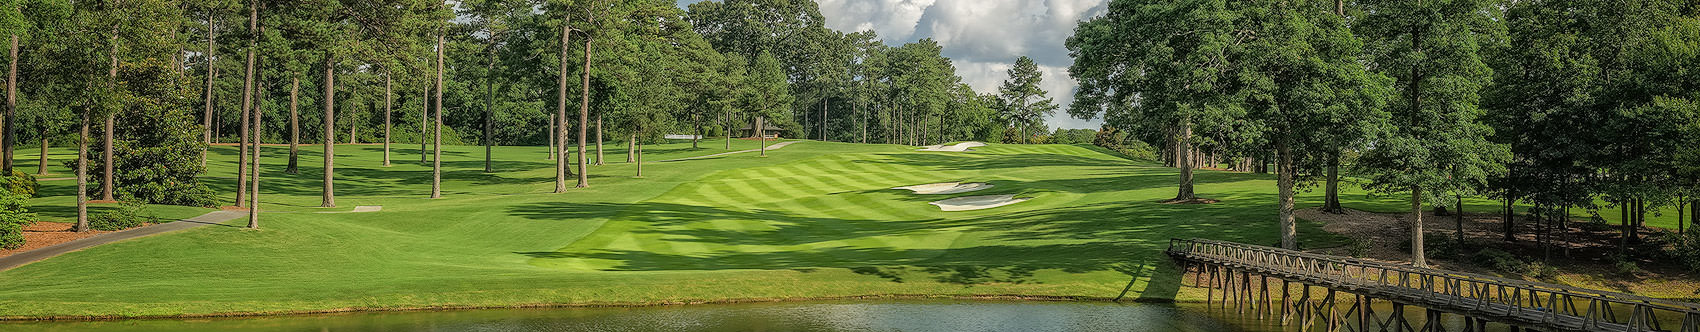 
        <div class='title'>
          PEACHTREE GOLF CLUB, ATLANTA, GEORGIA, 9TH HOLE
        </div>
       
        <div class='description'>
          Across the lake to the fairway from the tee on Peachtree Golf Club's 9th.
        </div>
      